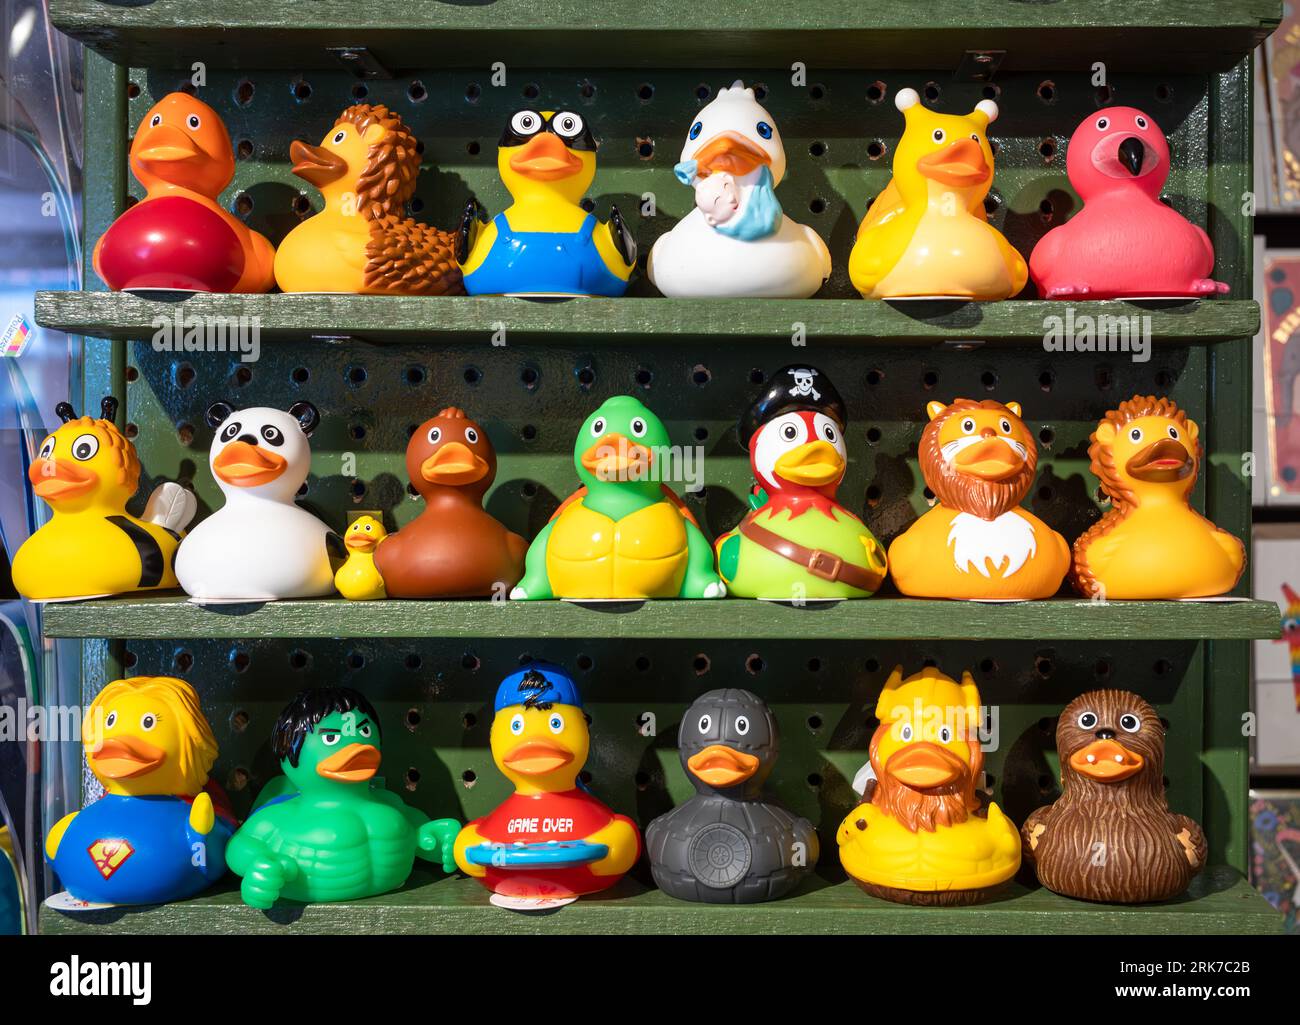 20 fun and colourful rubber ducks in different disguises including as superheroes lined up in three rows on shelves in a shop in Brighton, East Sussex Stock Photo